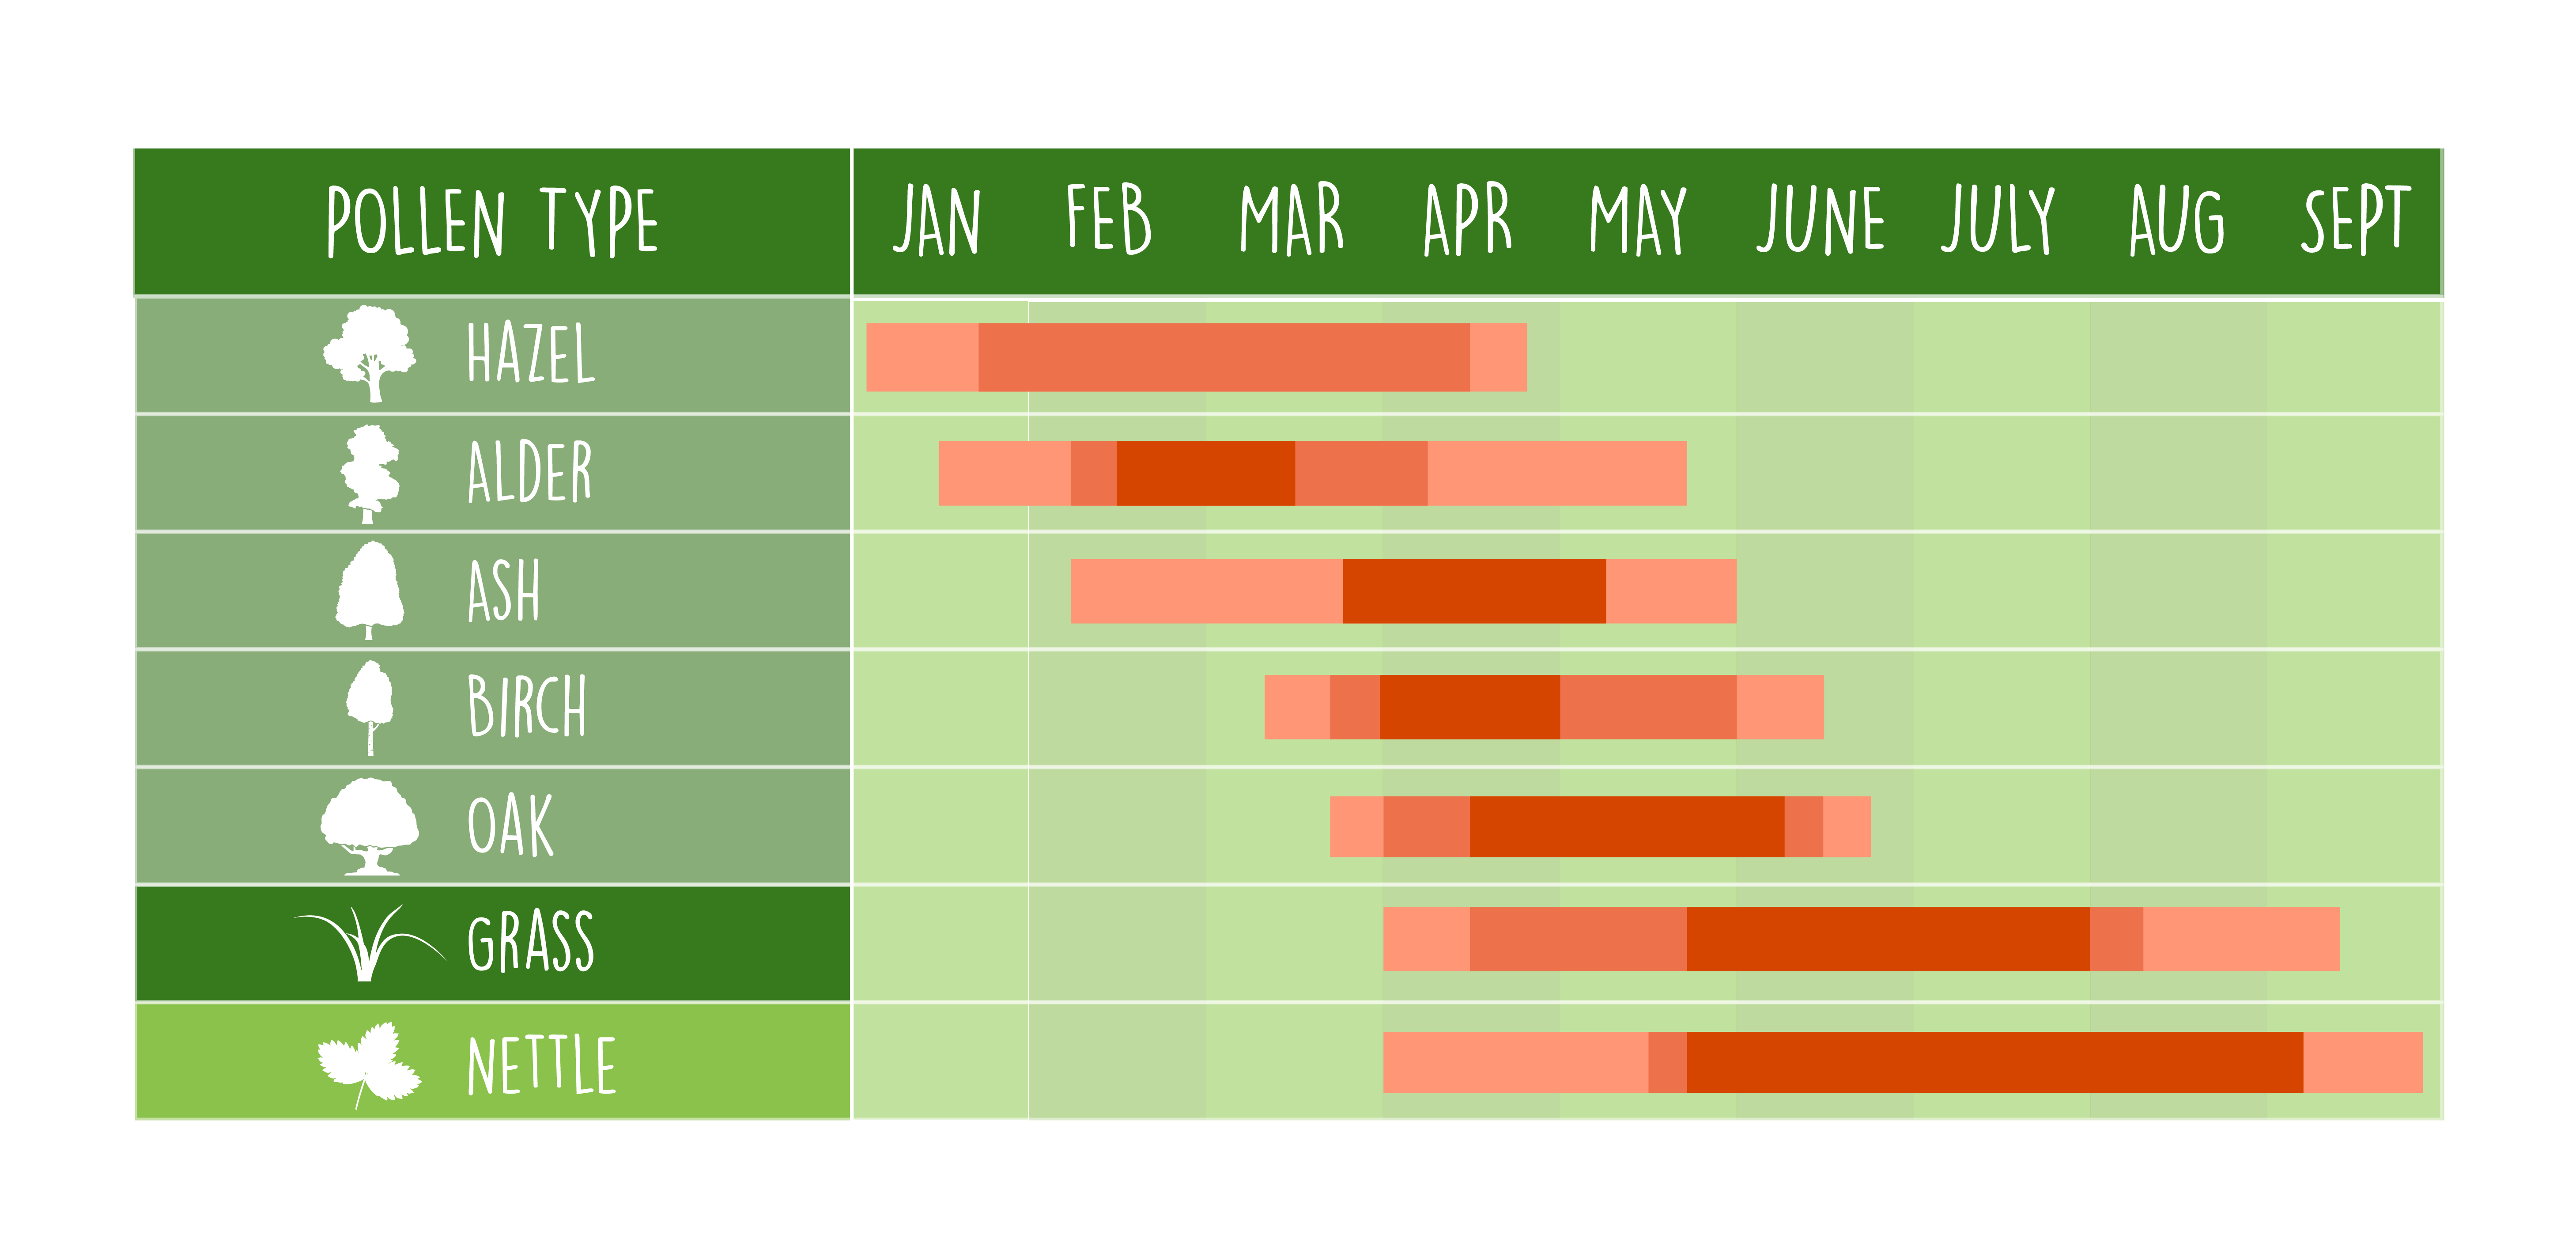 UK pollen calendar illustration, showing common pollen types in South West of England